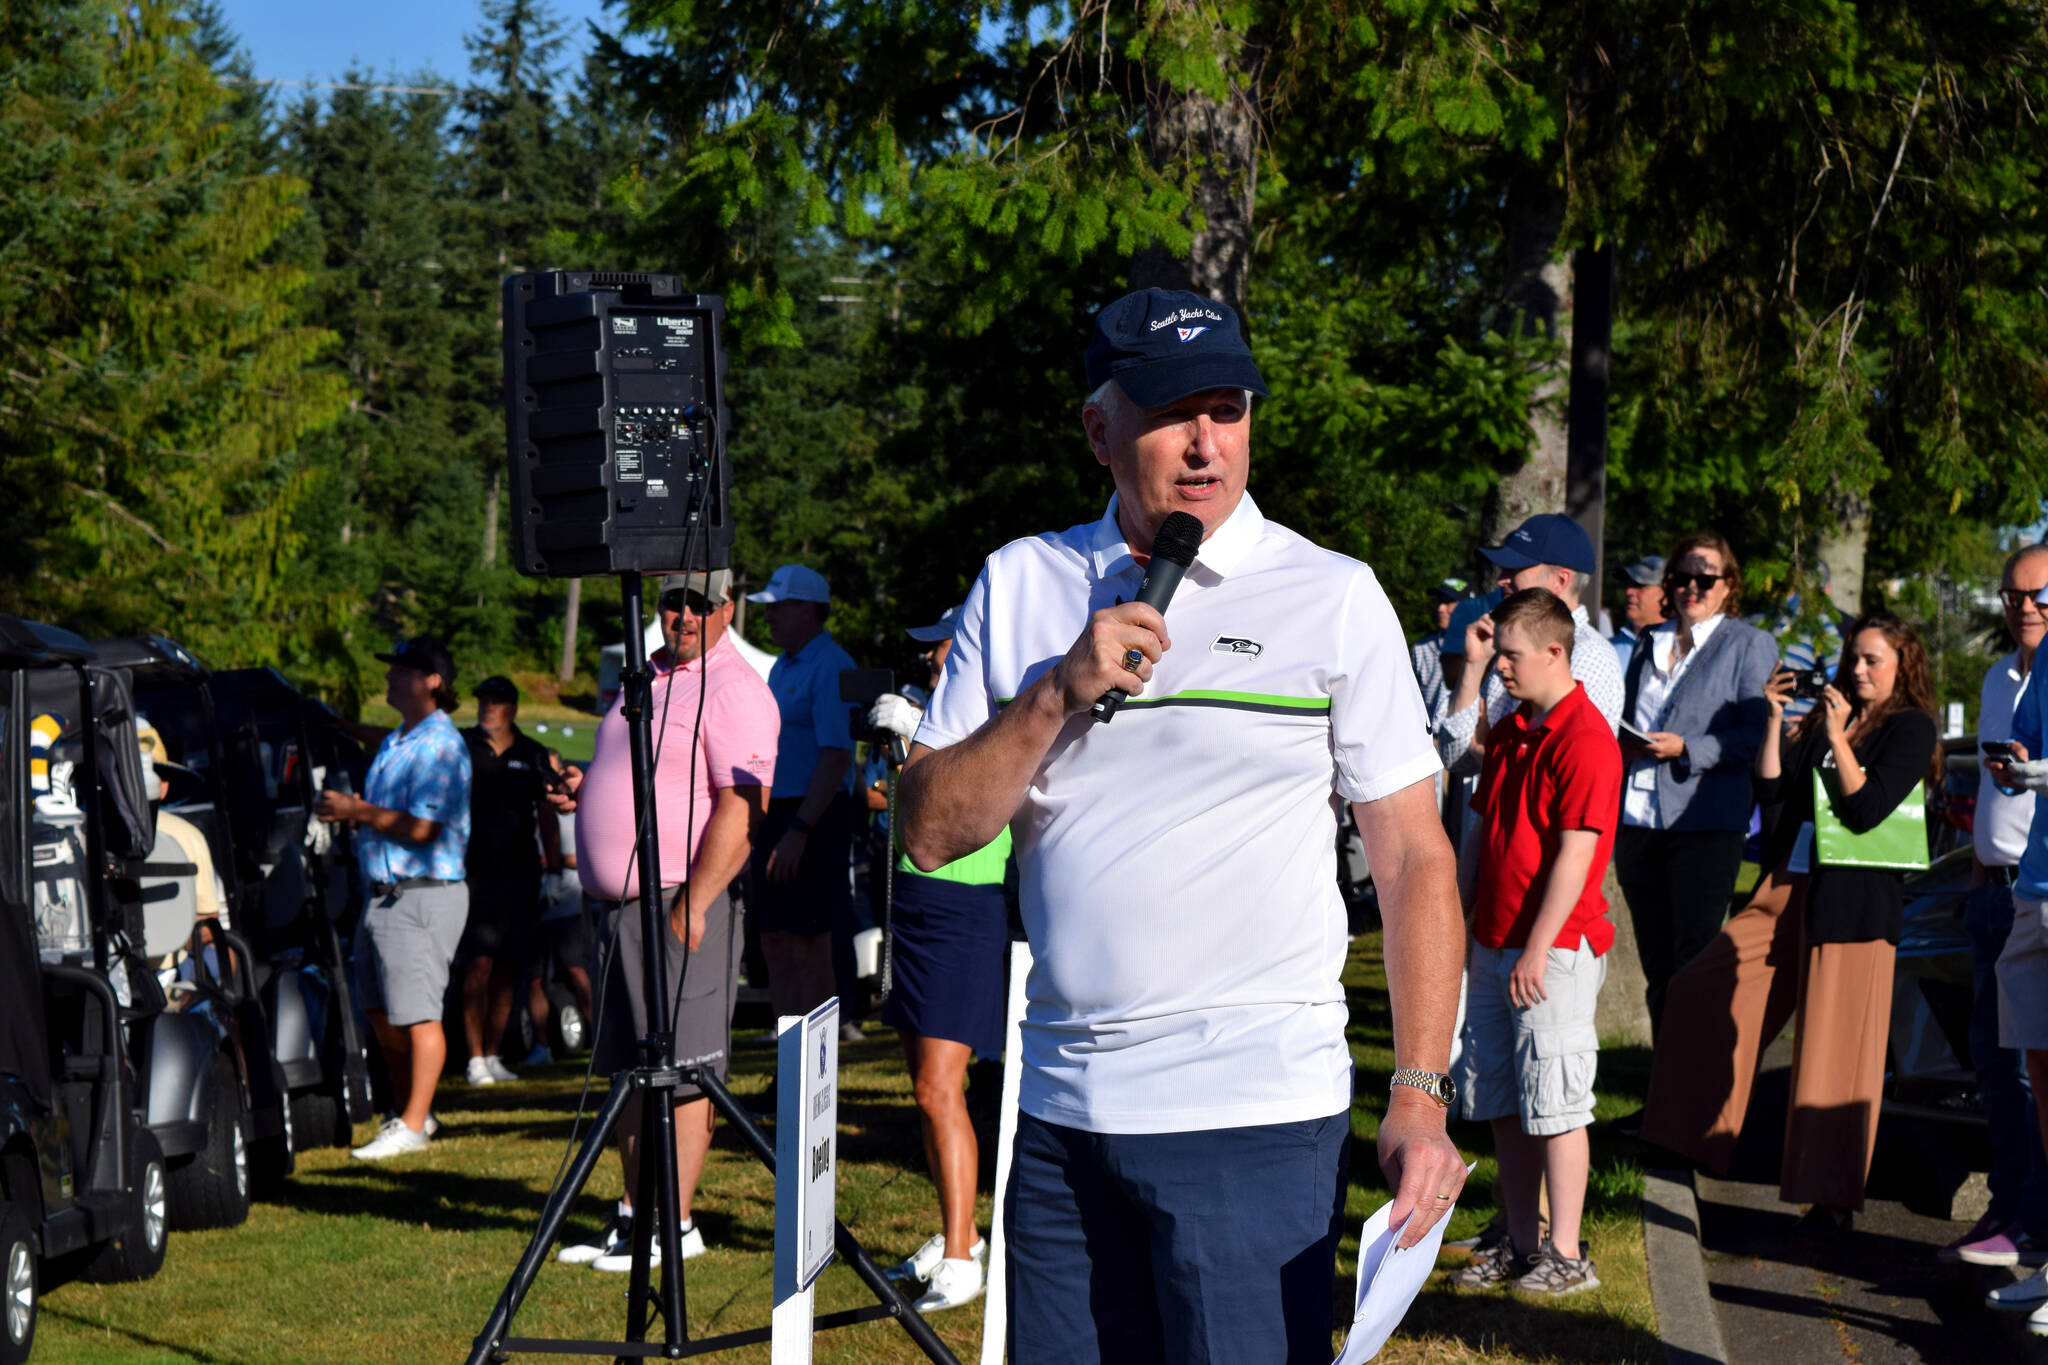 Seahawks announcer Steve Raible does introductions at the Seahawks Rumble at the The Ridge charity fundraiser on Aug. 8. Photo by Conor Wilson/Valley Record.